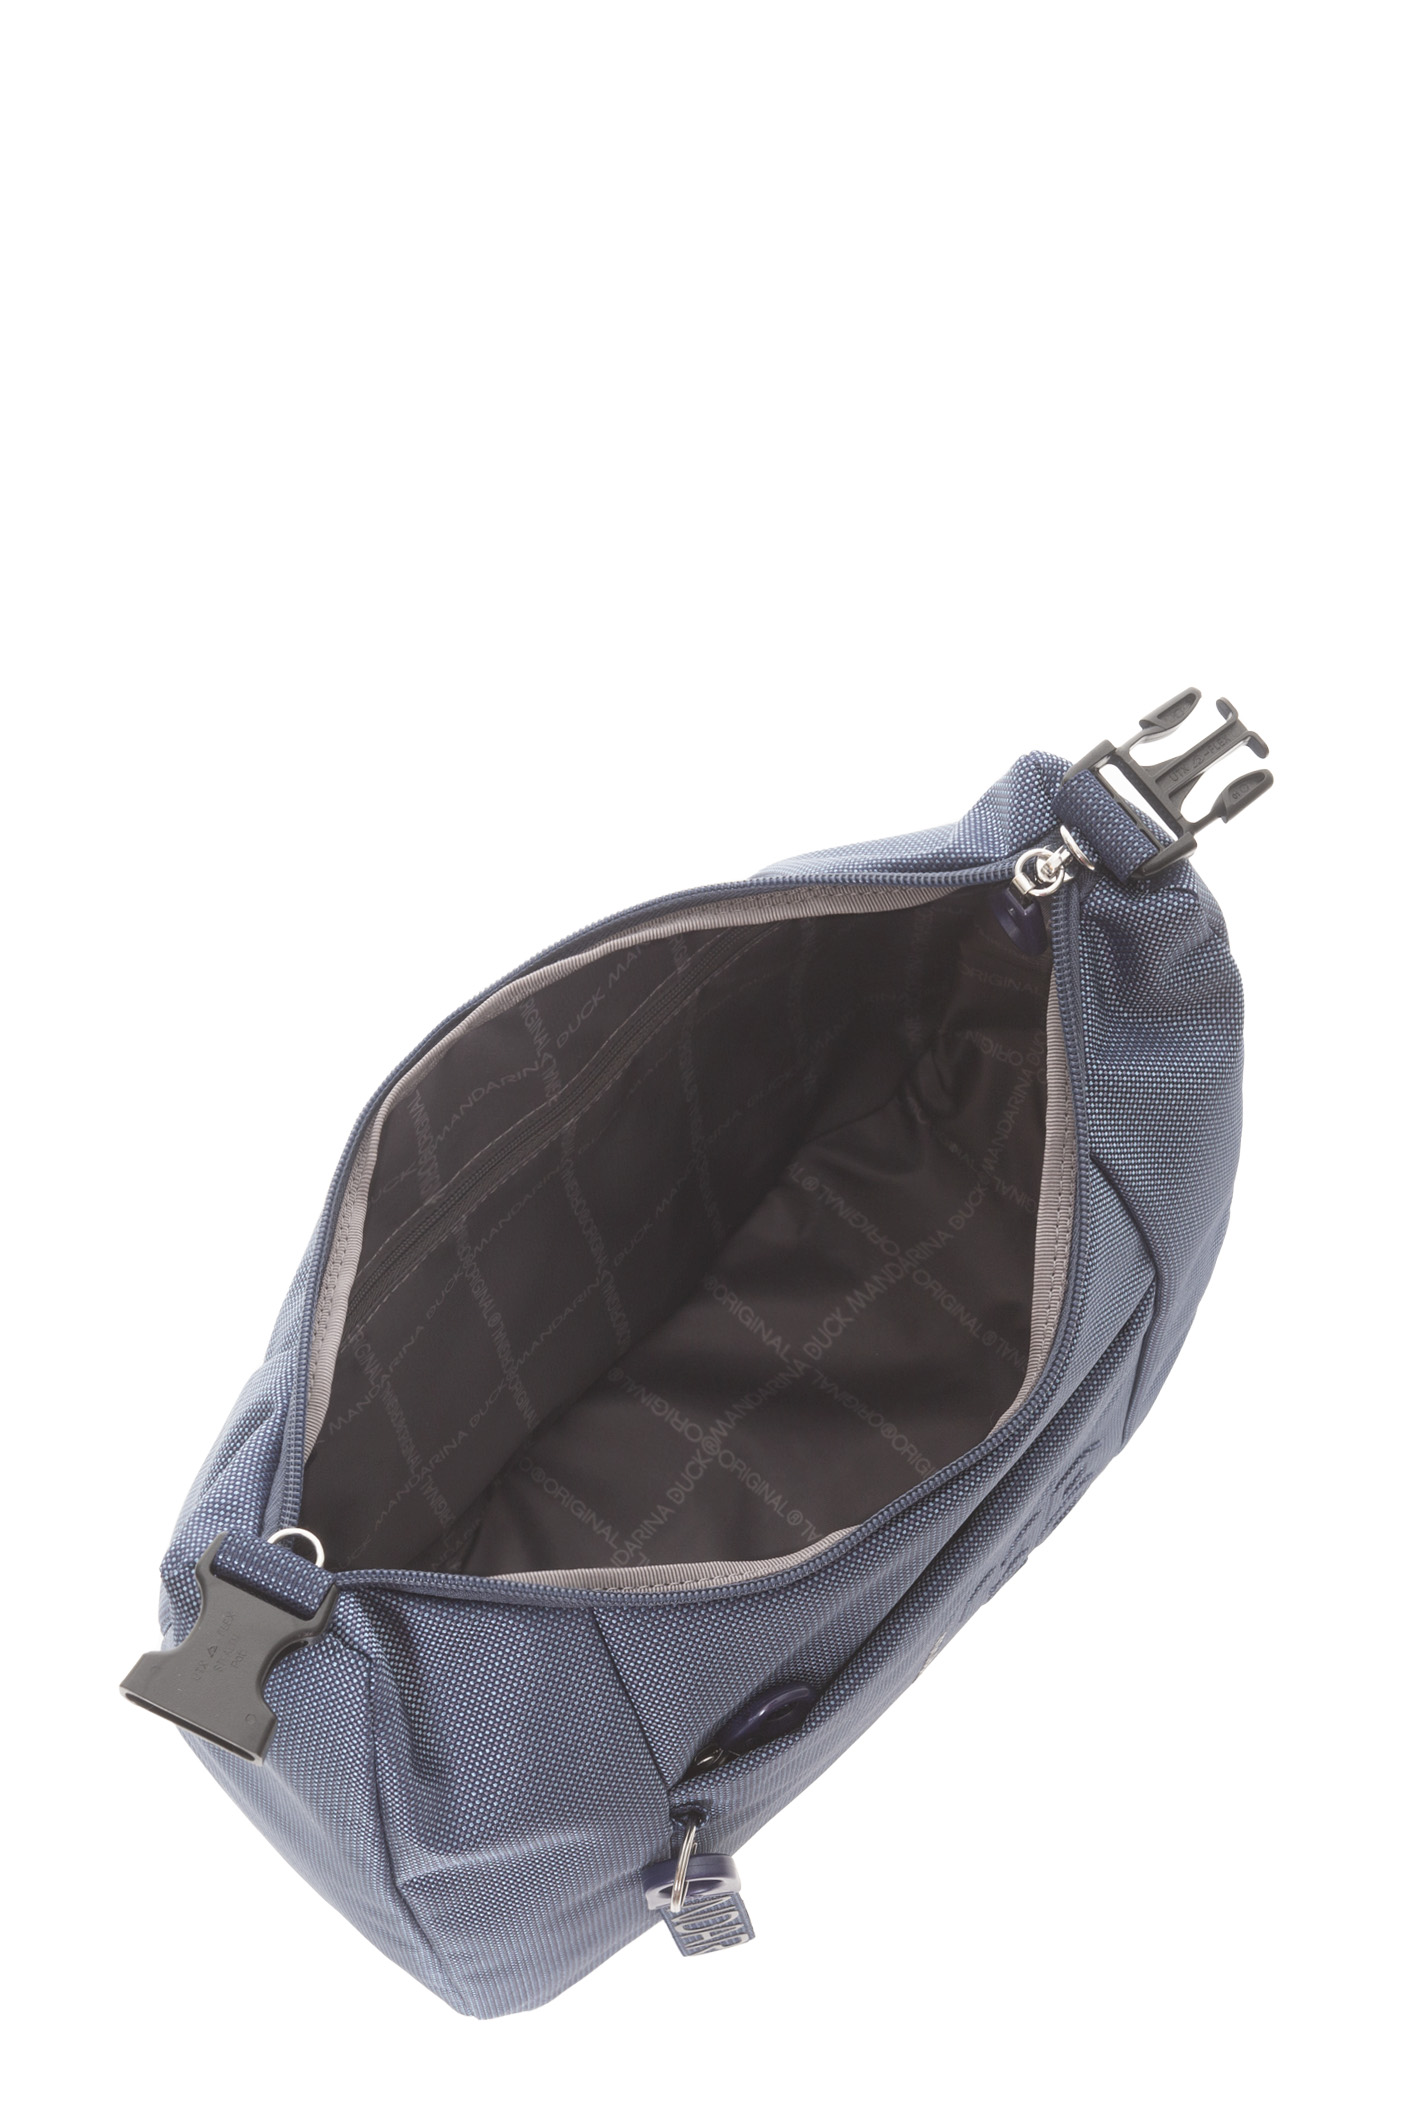 MD20 BUCKLE POUCH